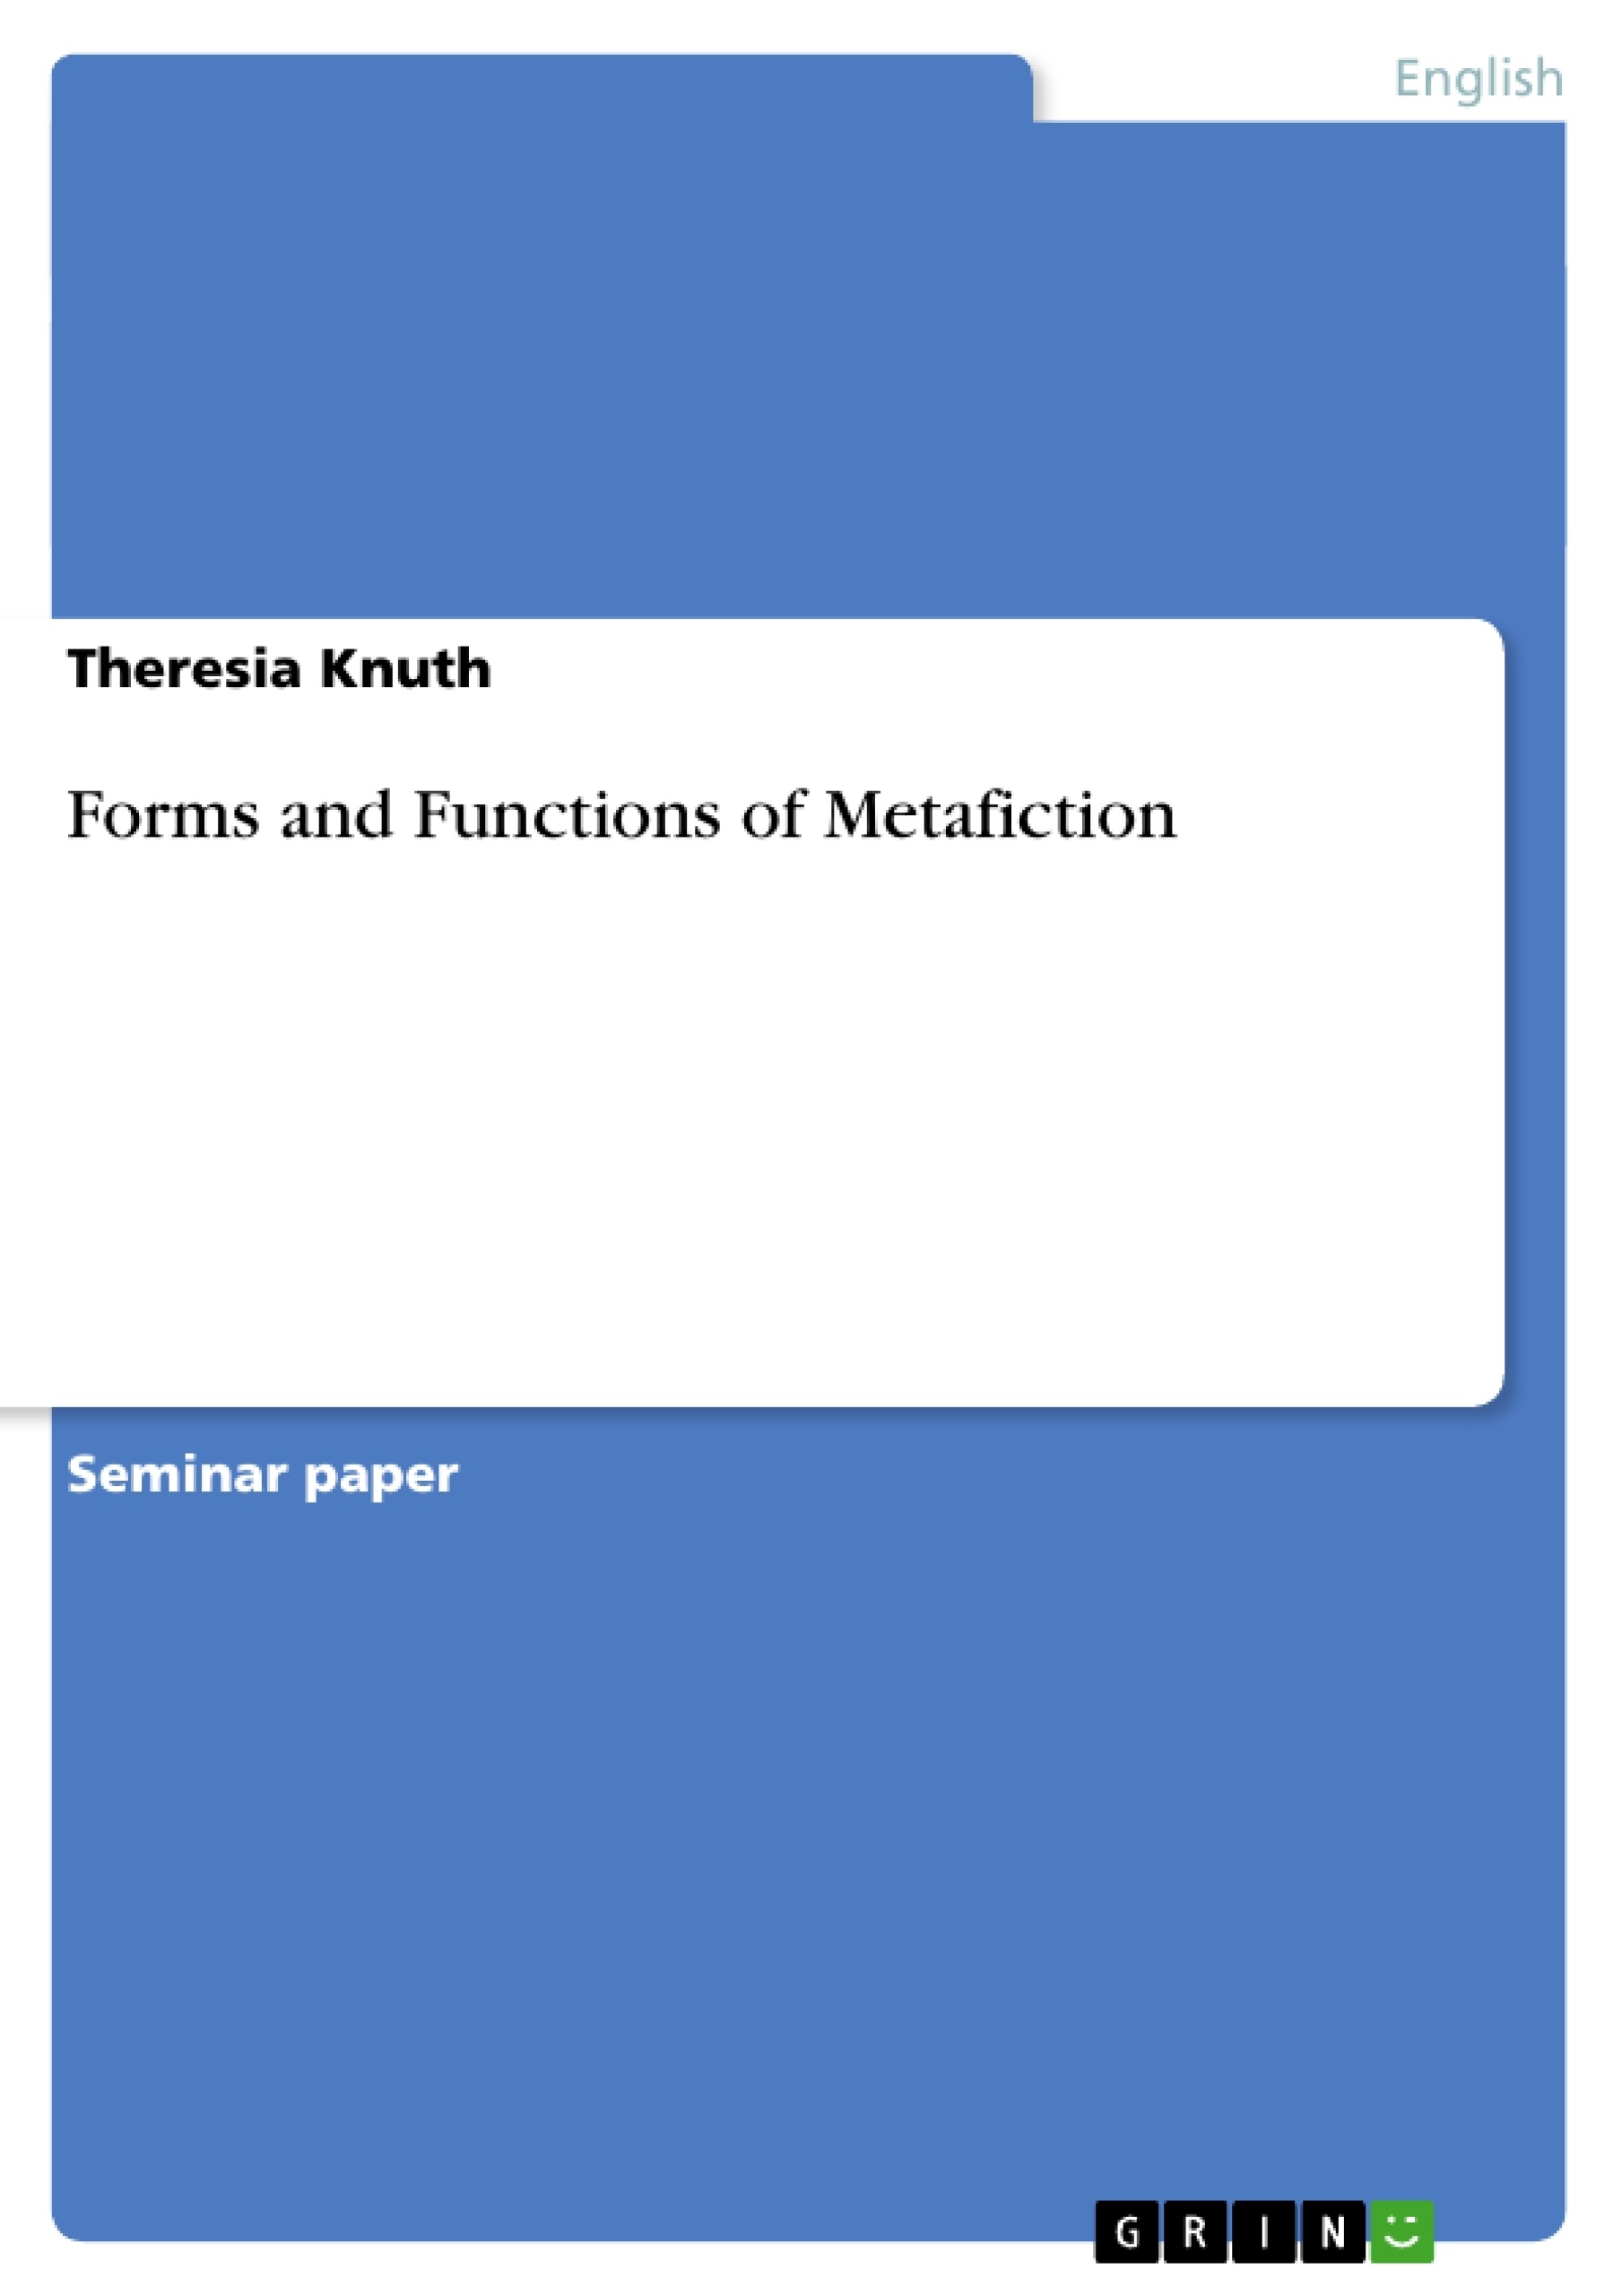 Title: Forms and Functions of Metafiction